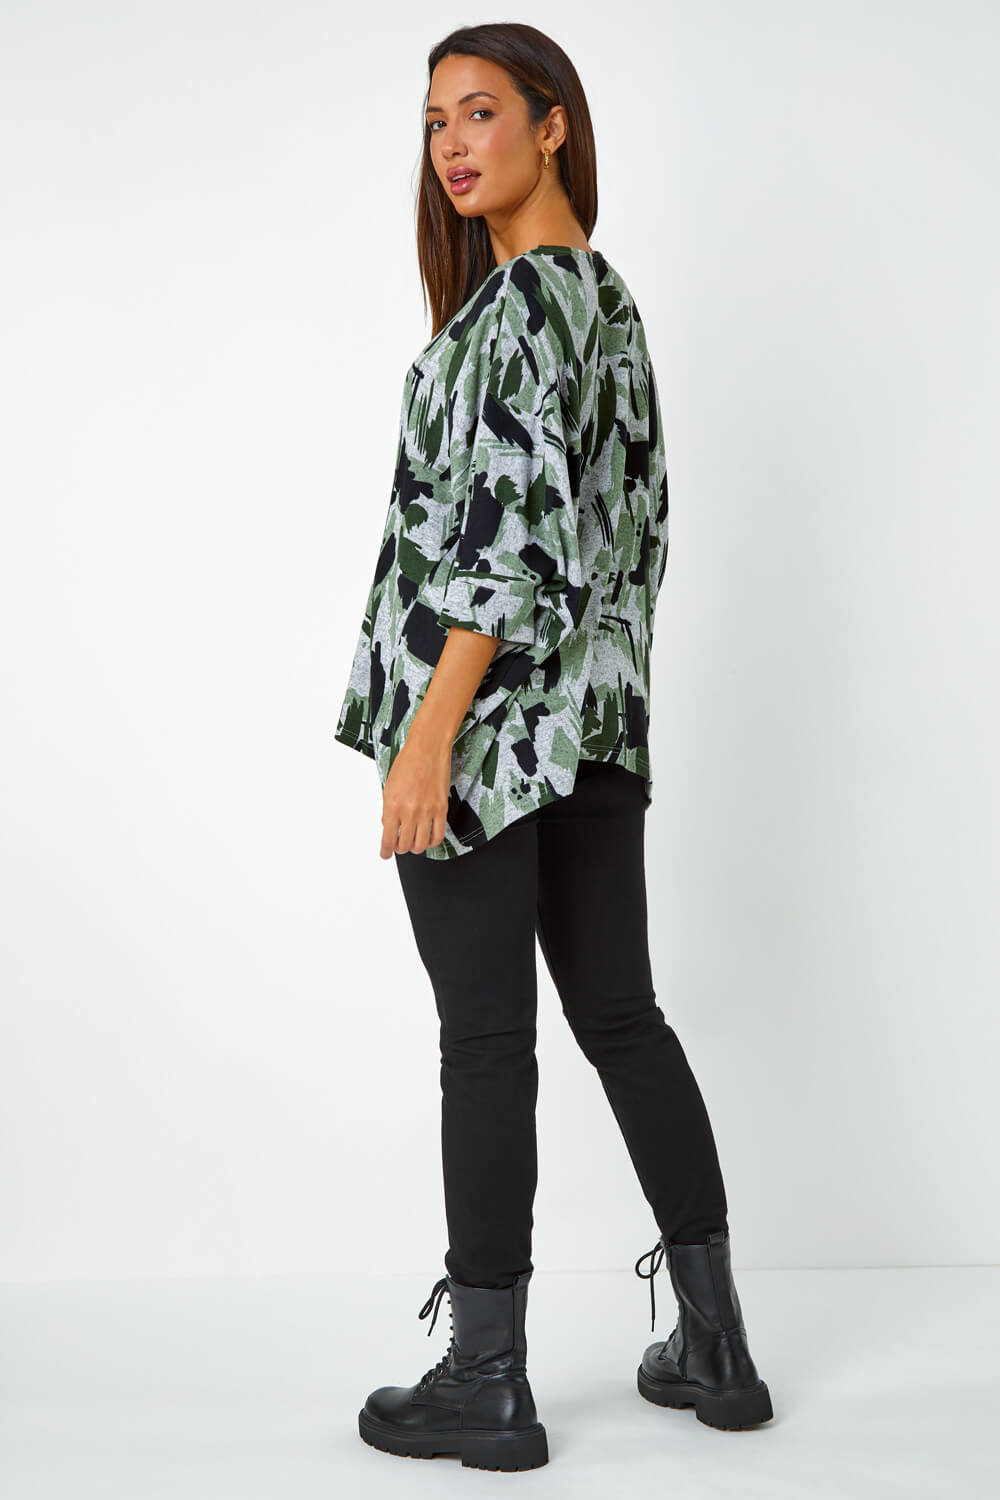 KHAKI Relaxed Abstract Print Stretch Top , Image 3 of 5